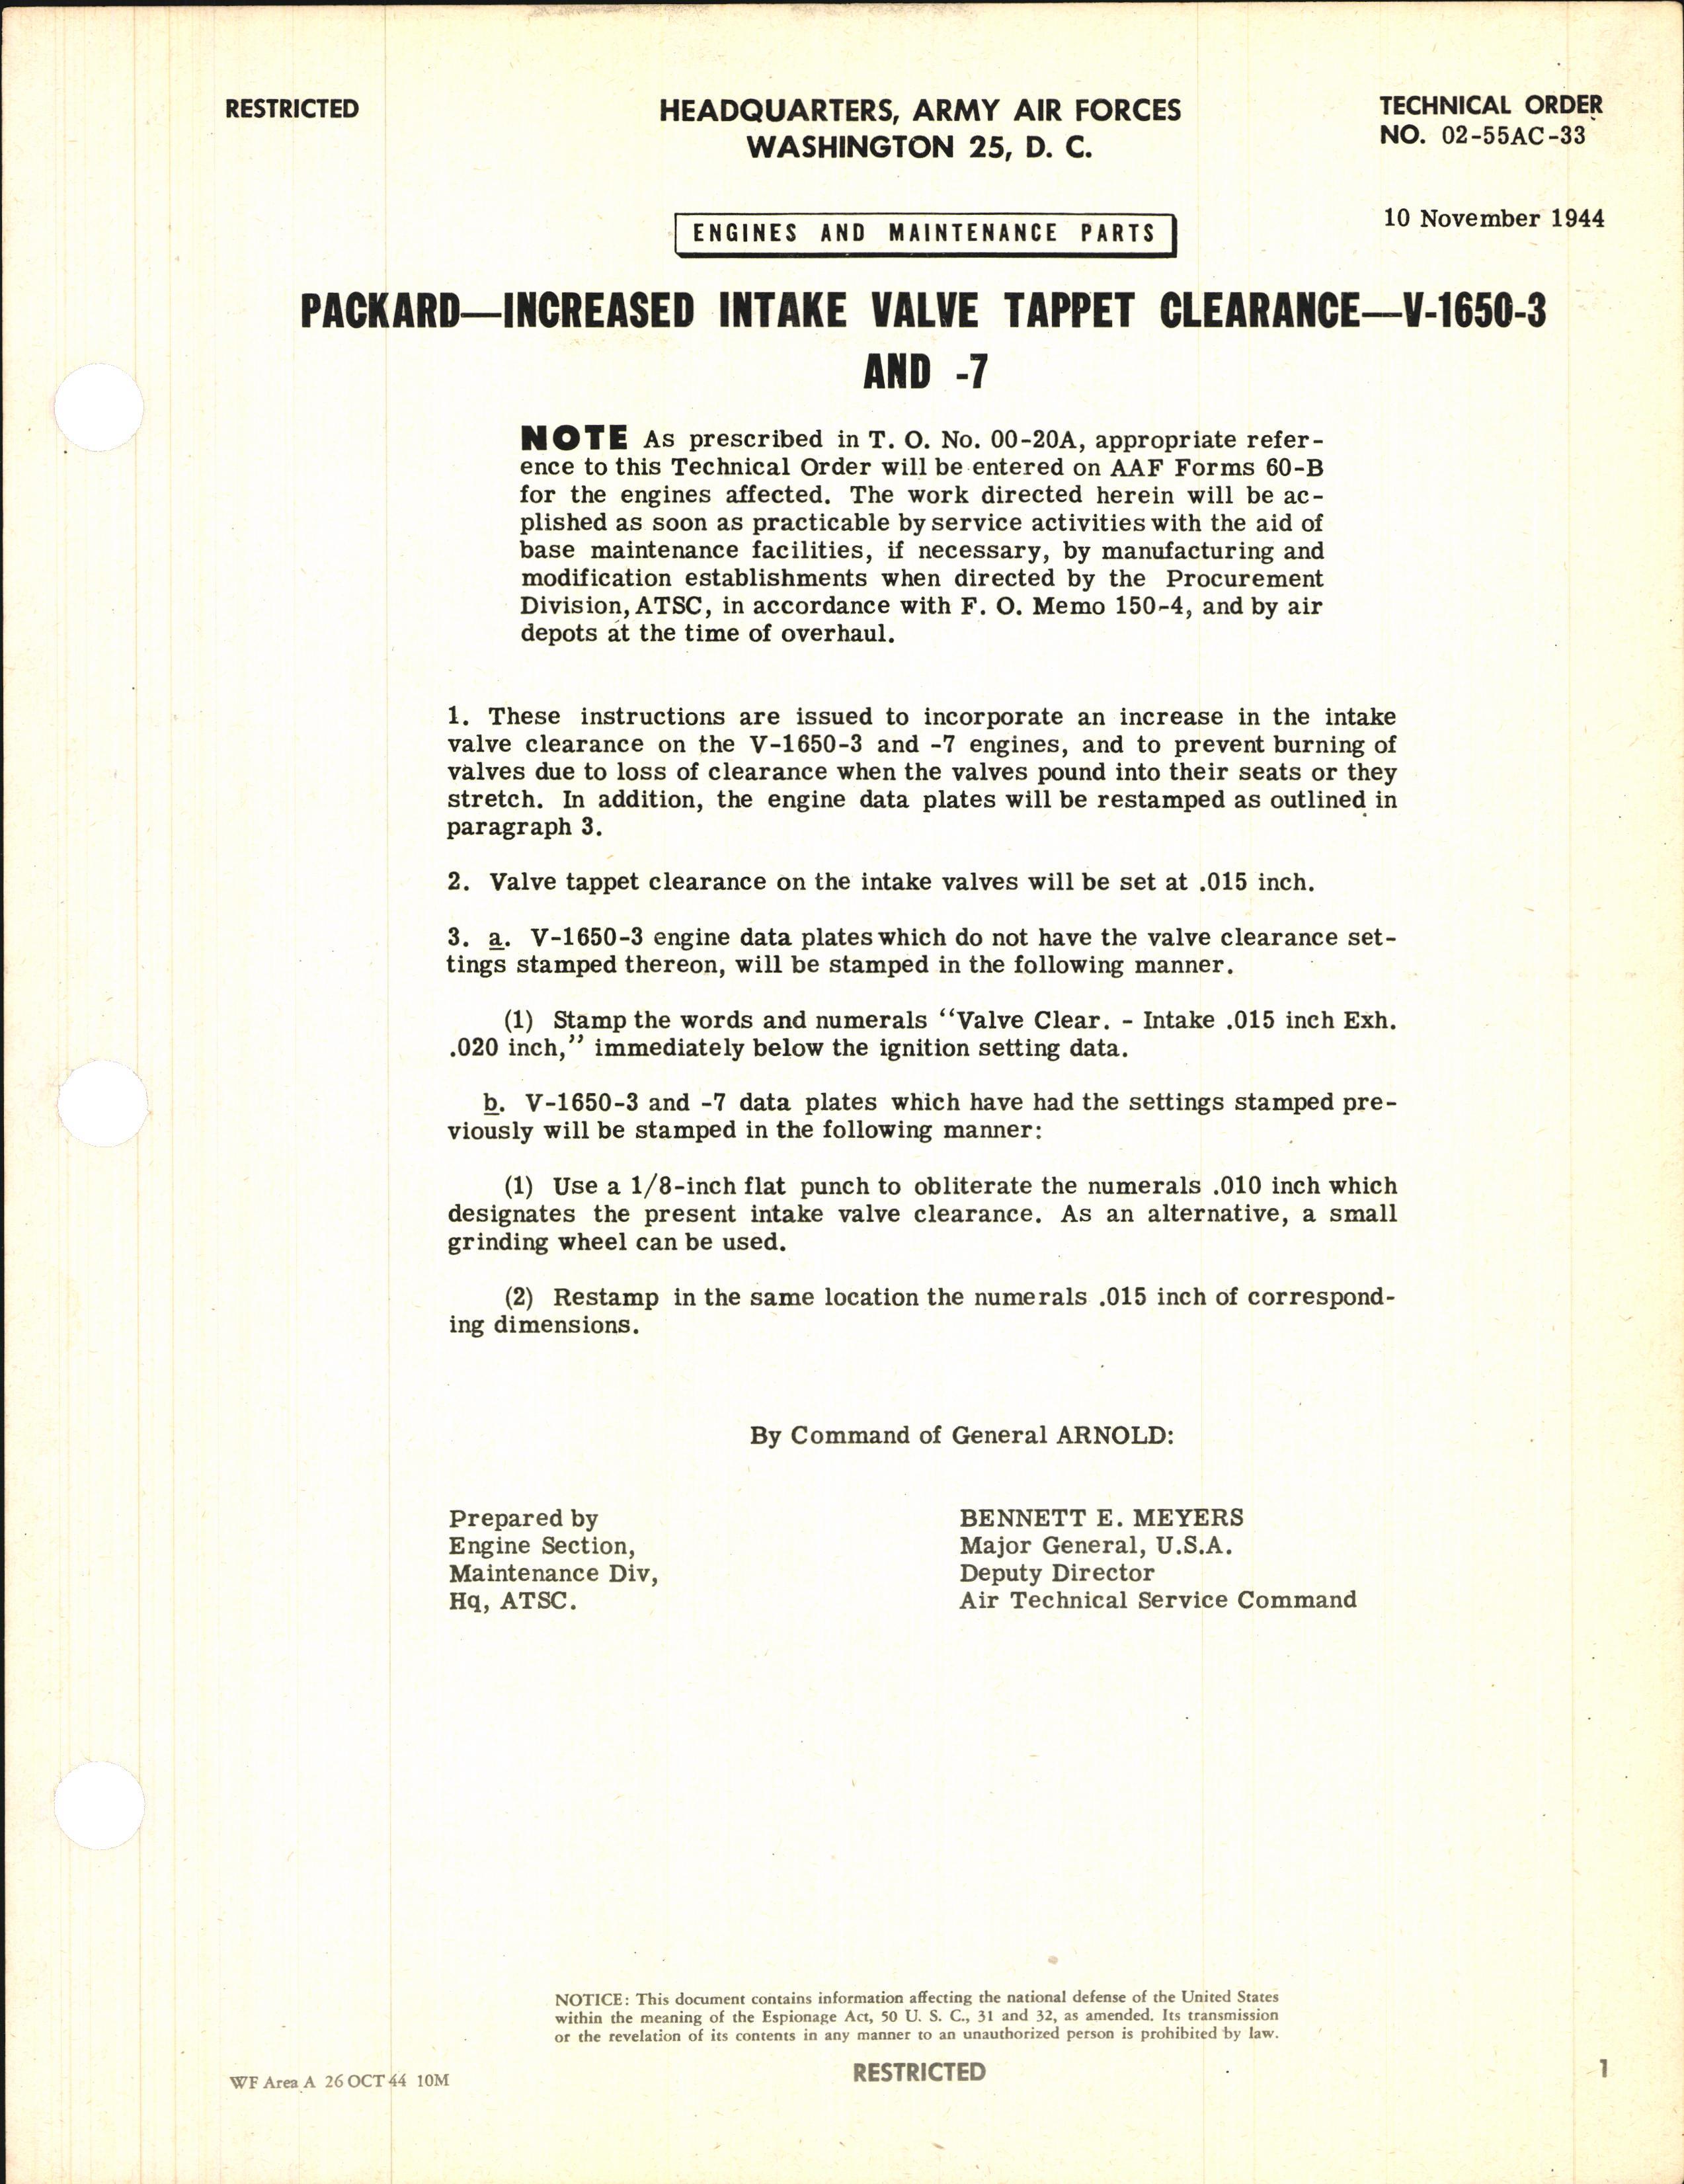 Sample page 1 from AirCorps Library document: Increased Intake Valve Tappet Clearance for V-1650-3 and -7